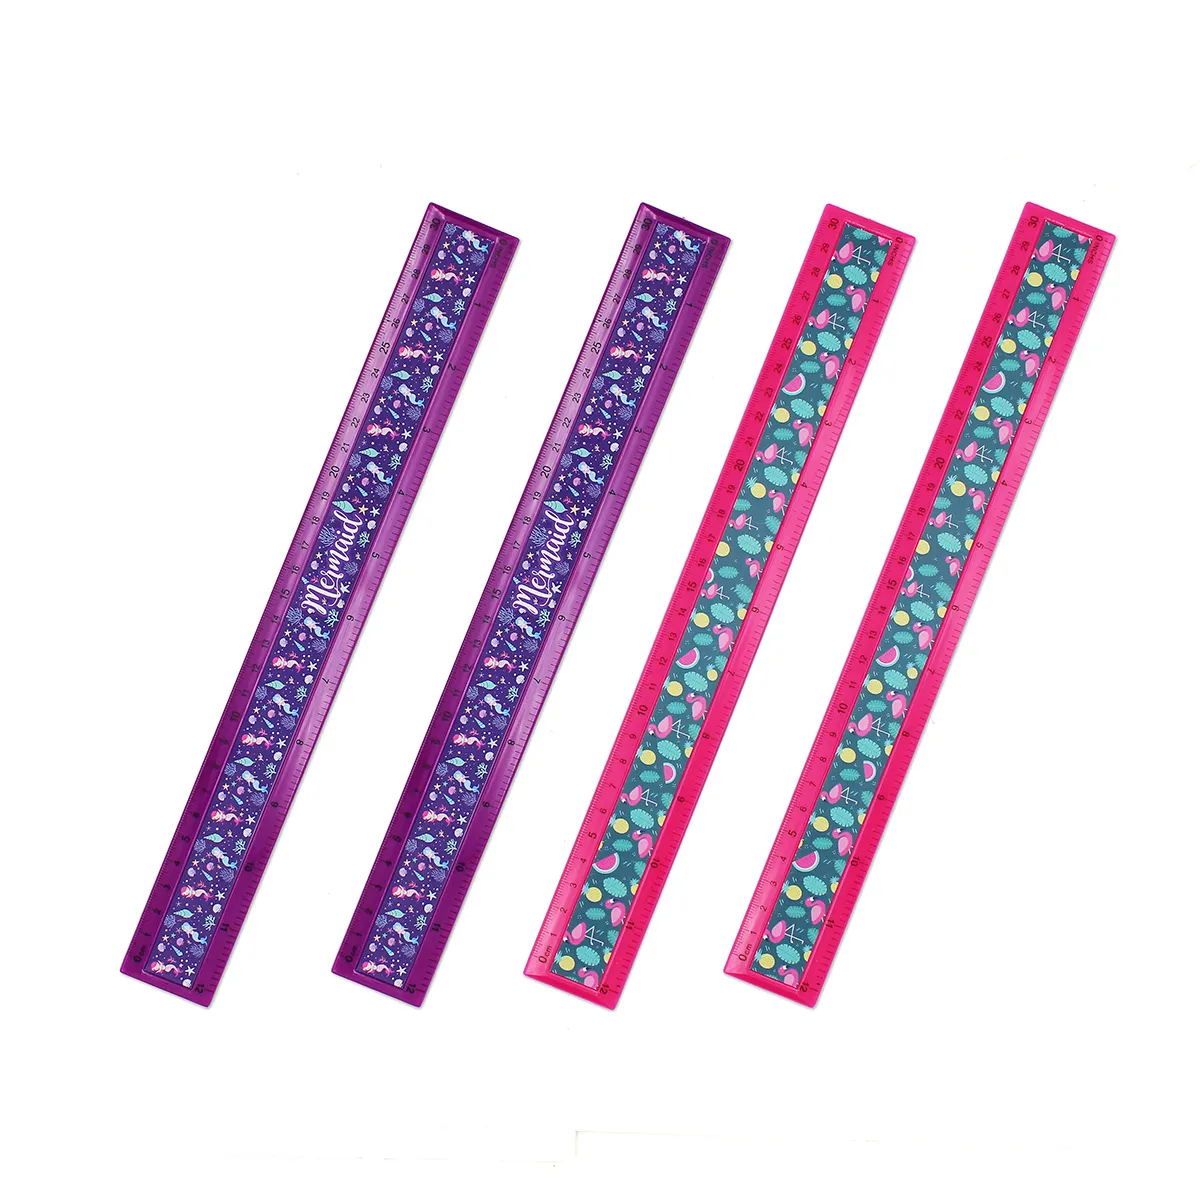 New Arrival Fashion Rulers Plastic 30CM Ruler with Sticker